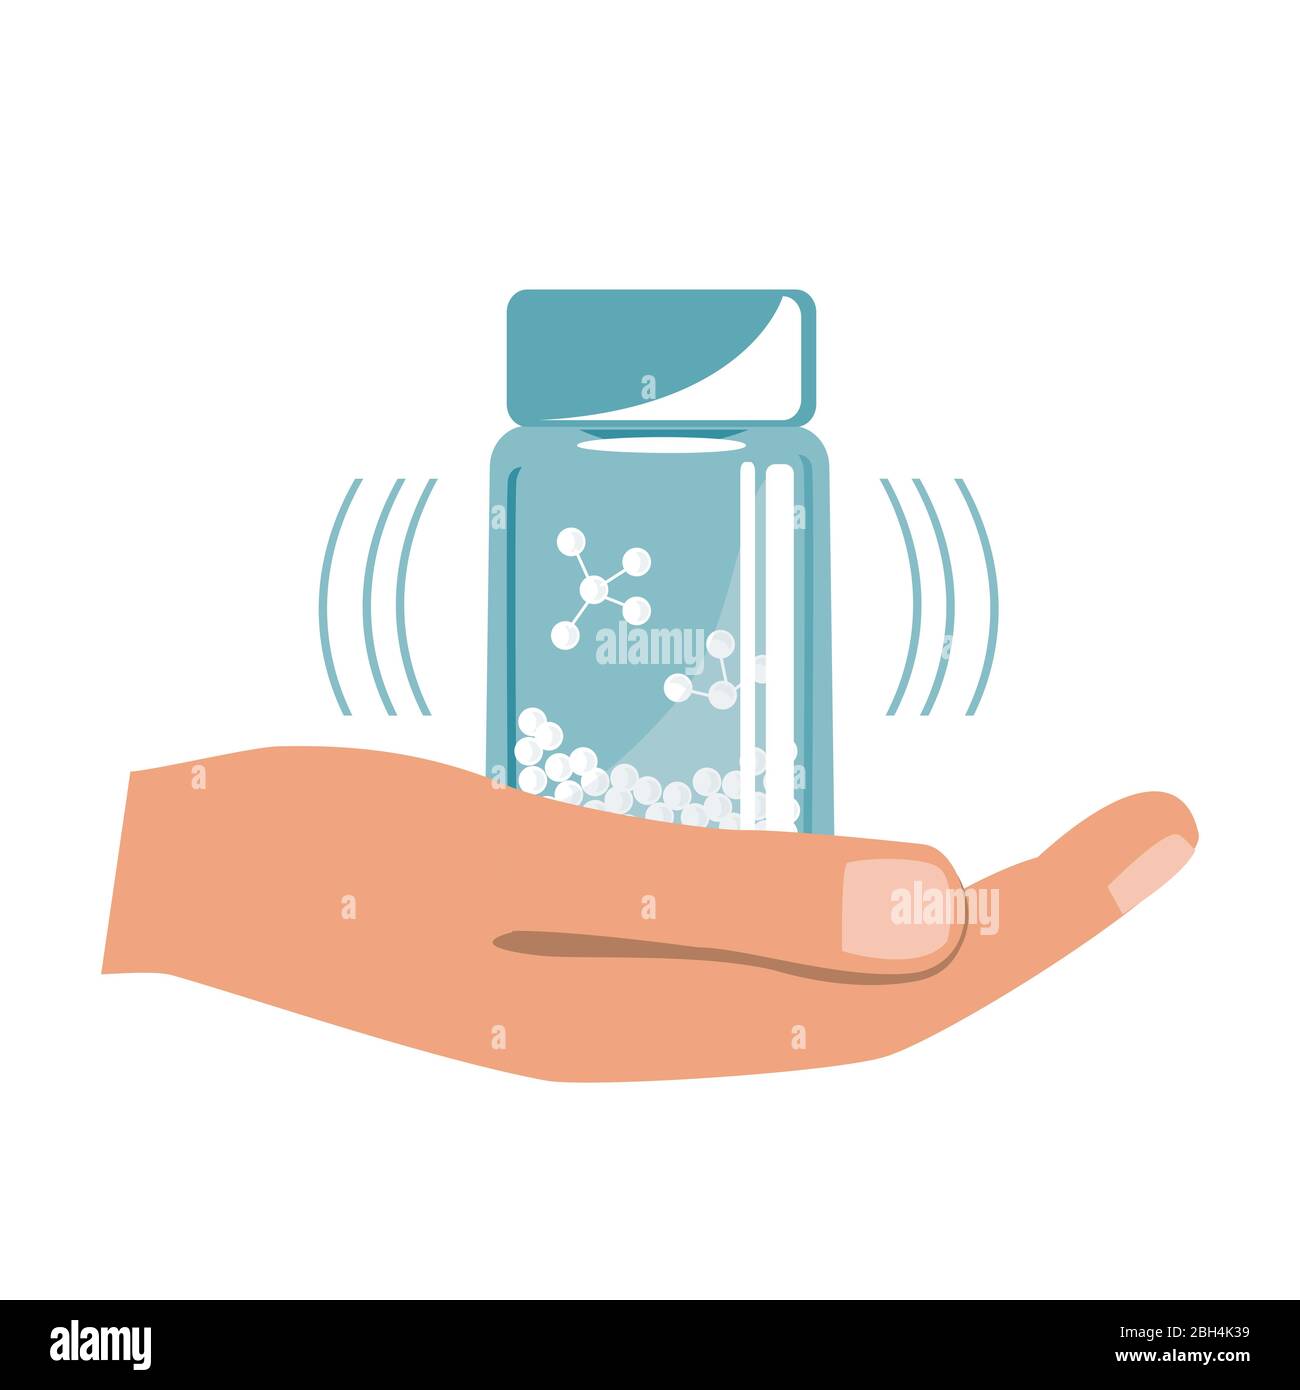 Hand with Homeopathy Medicines Bottle isolated on a White Background. Vector illustration Stock Vector